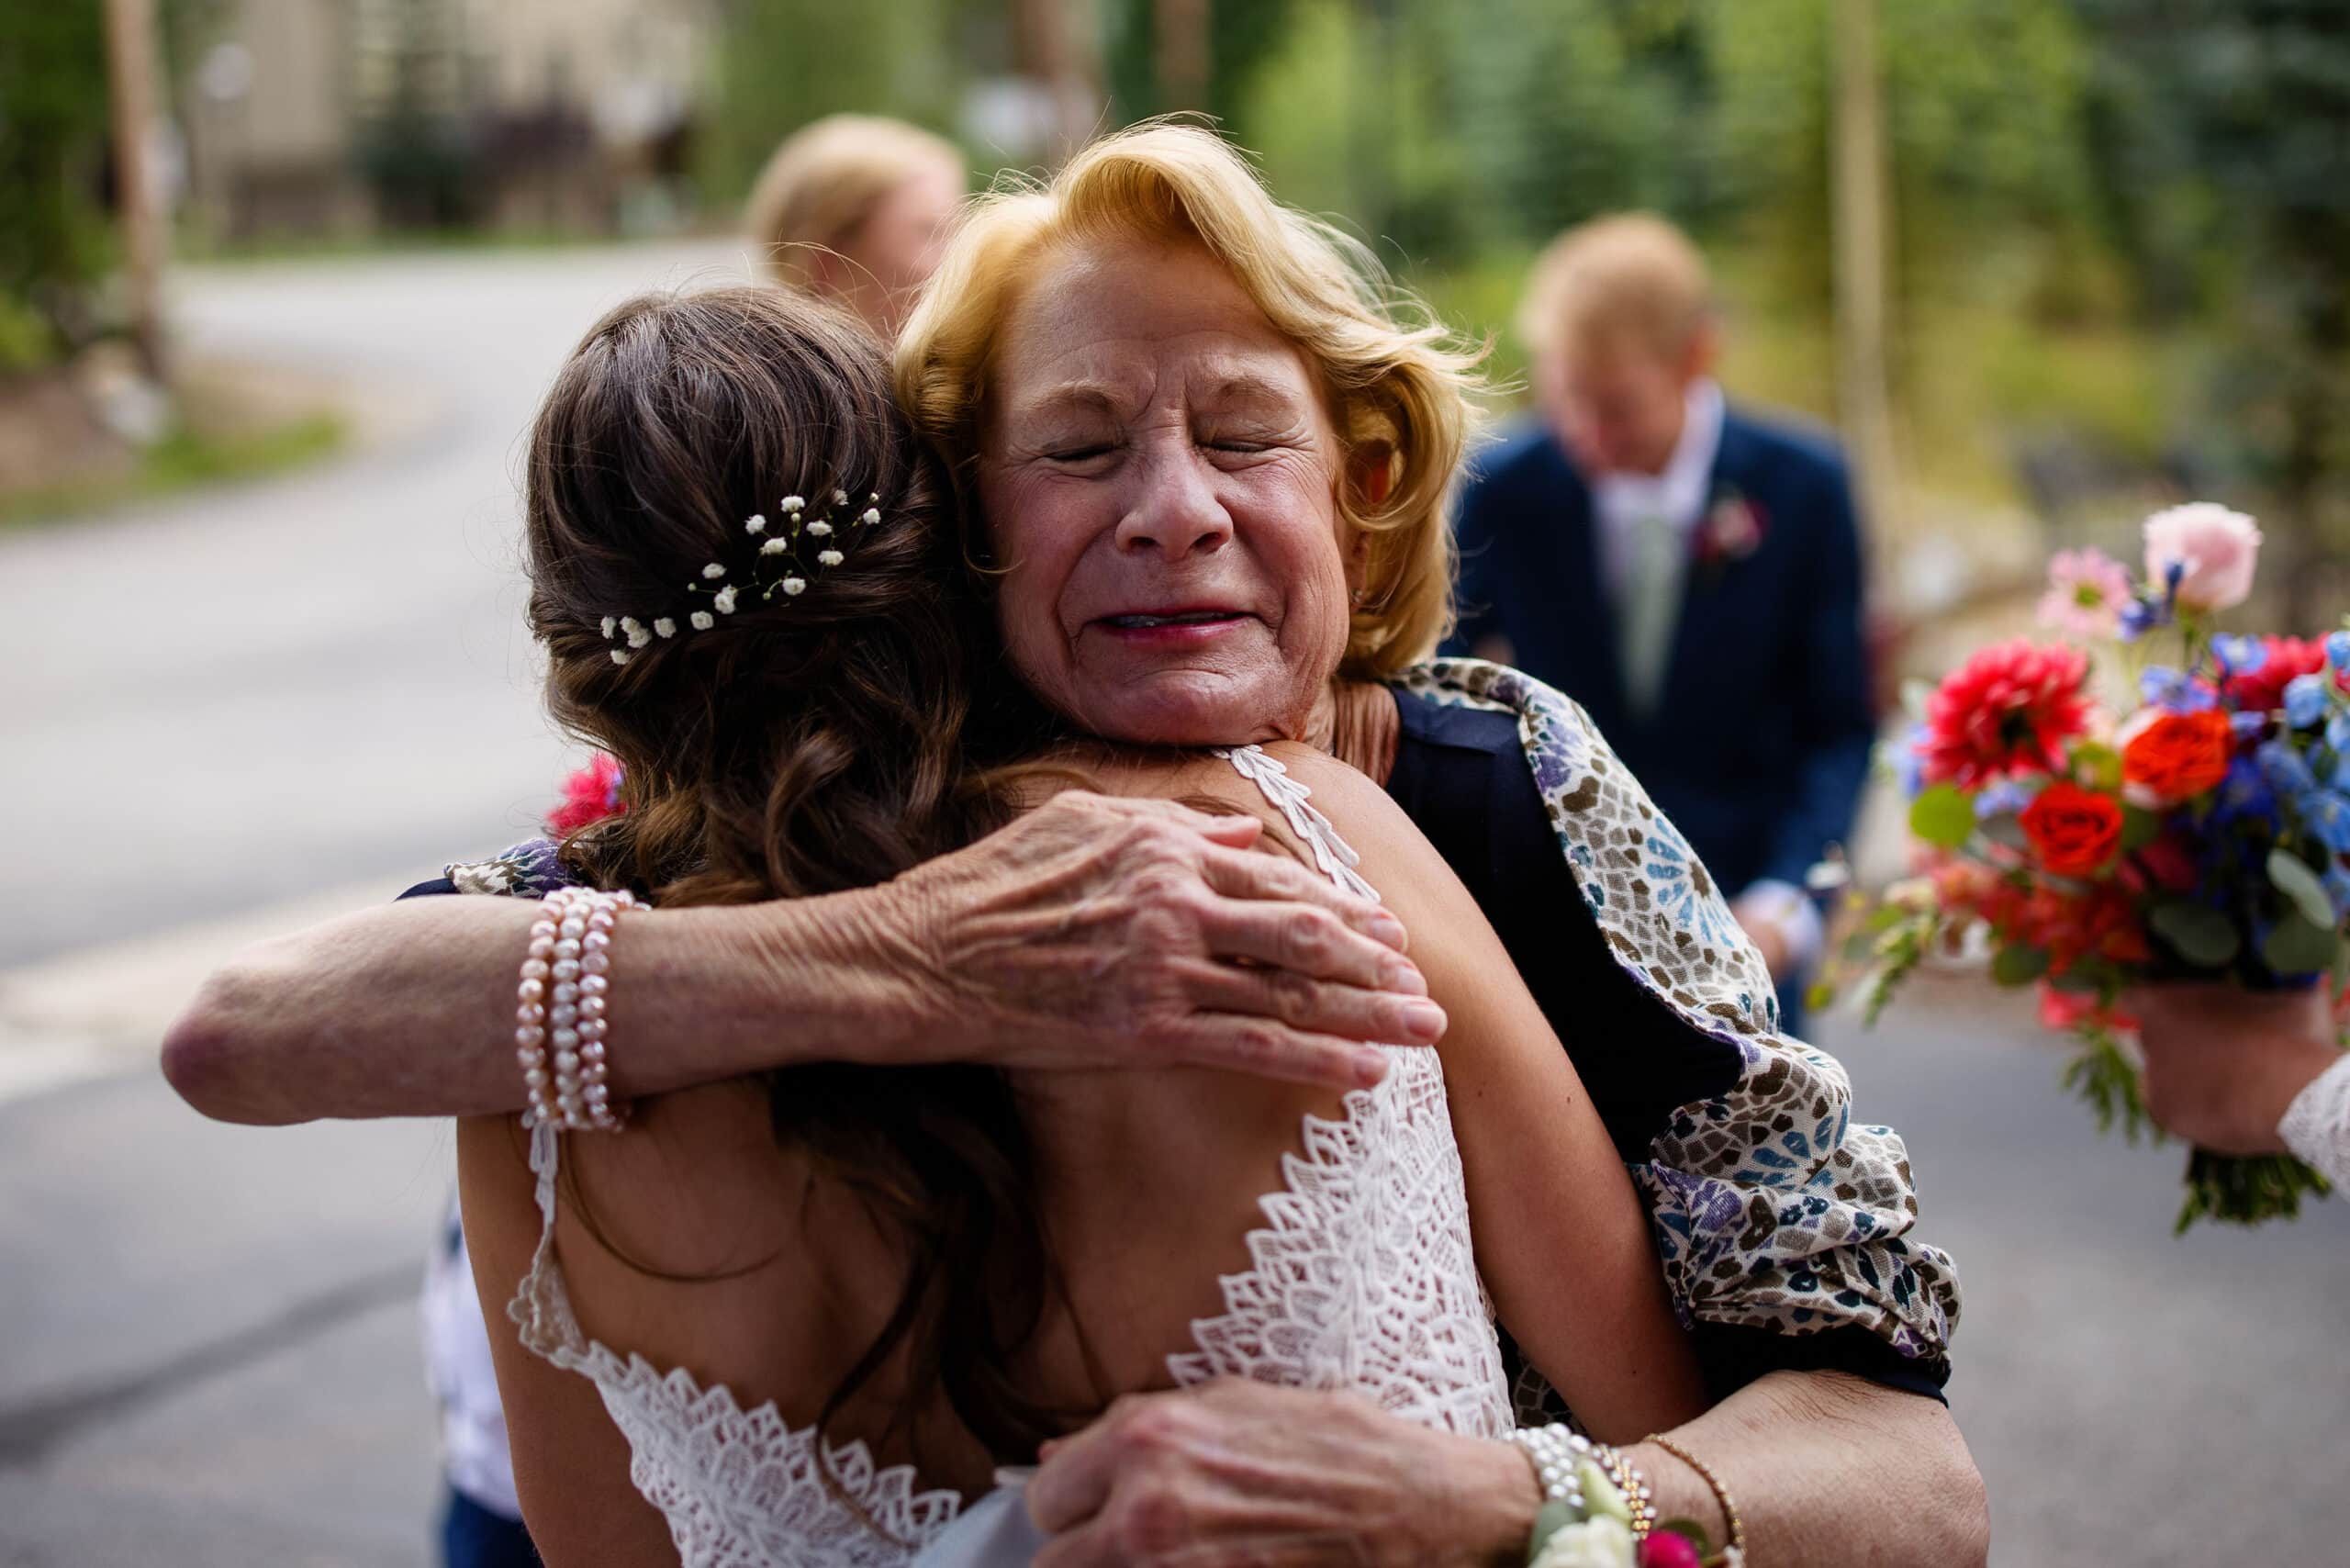 Anna’s mother hugs her after the ceremony